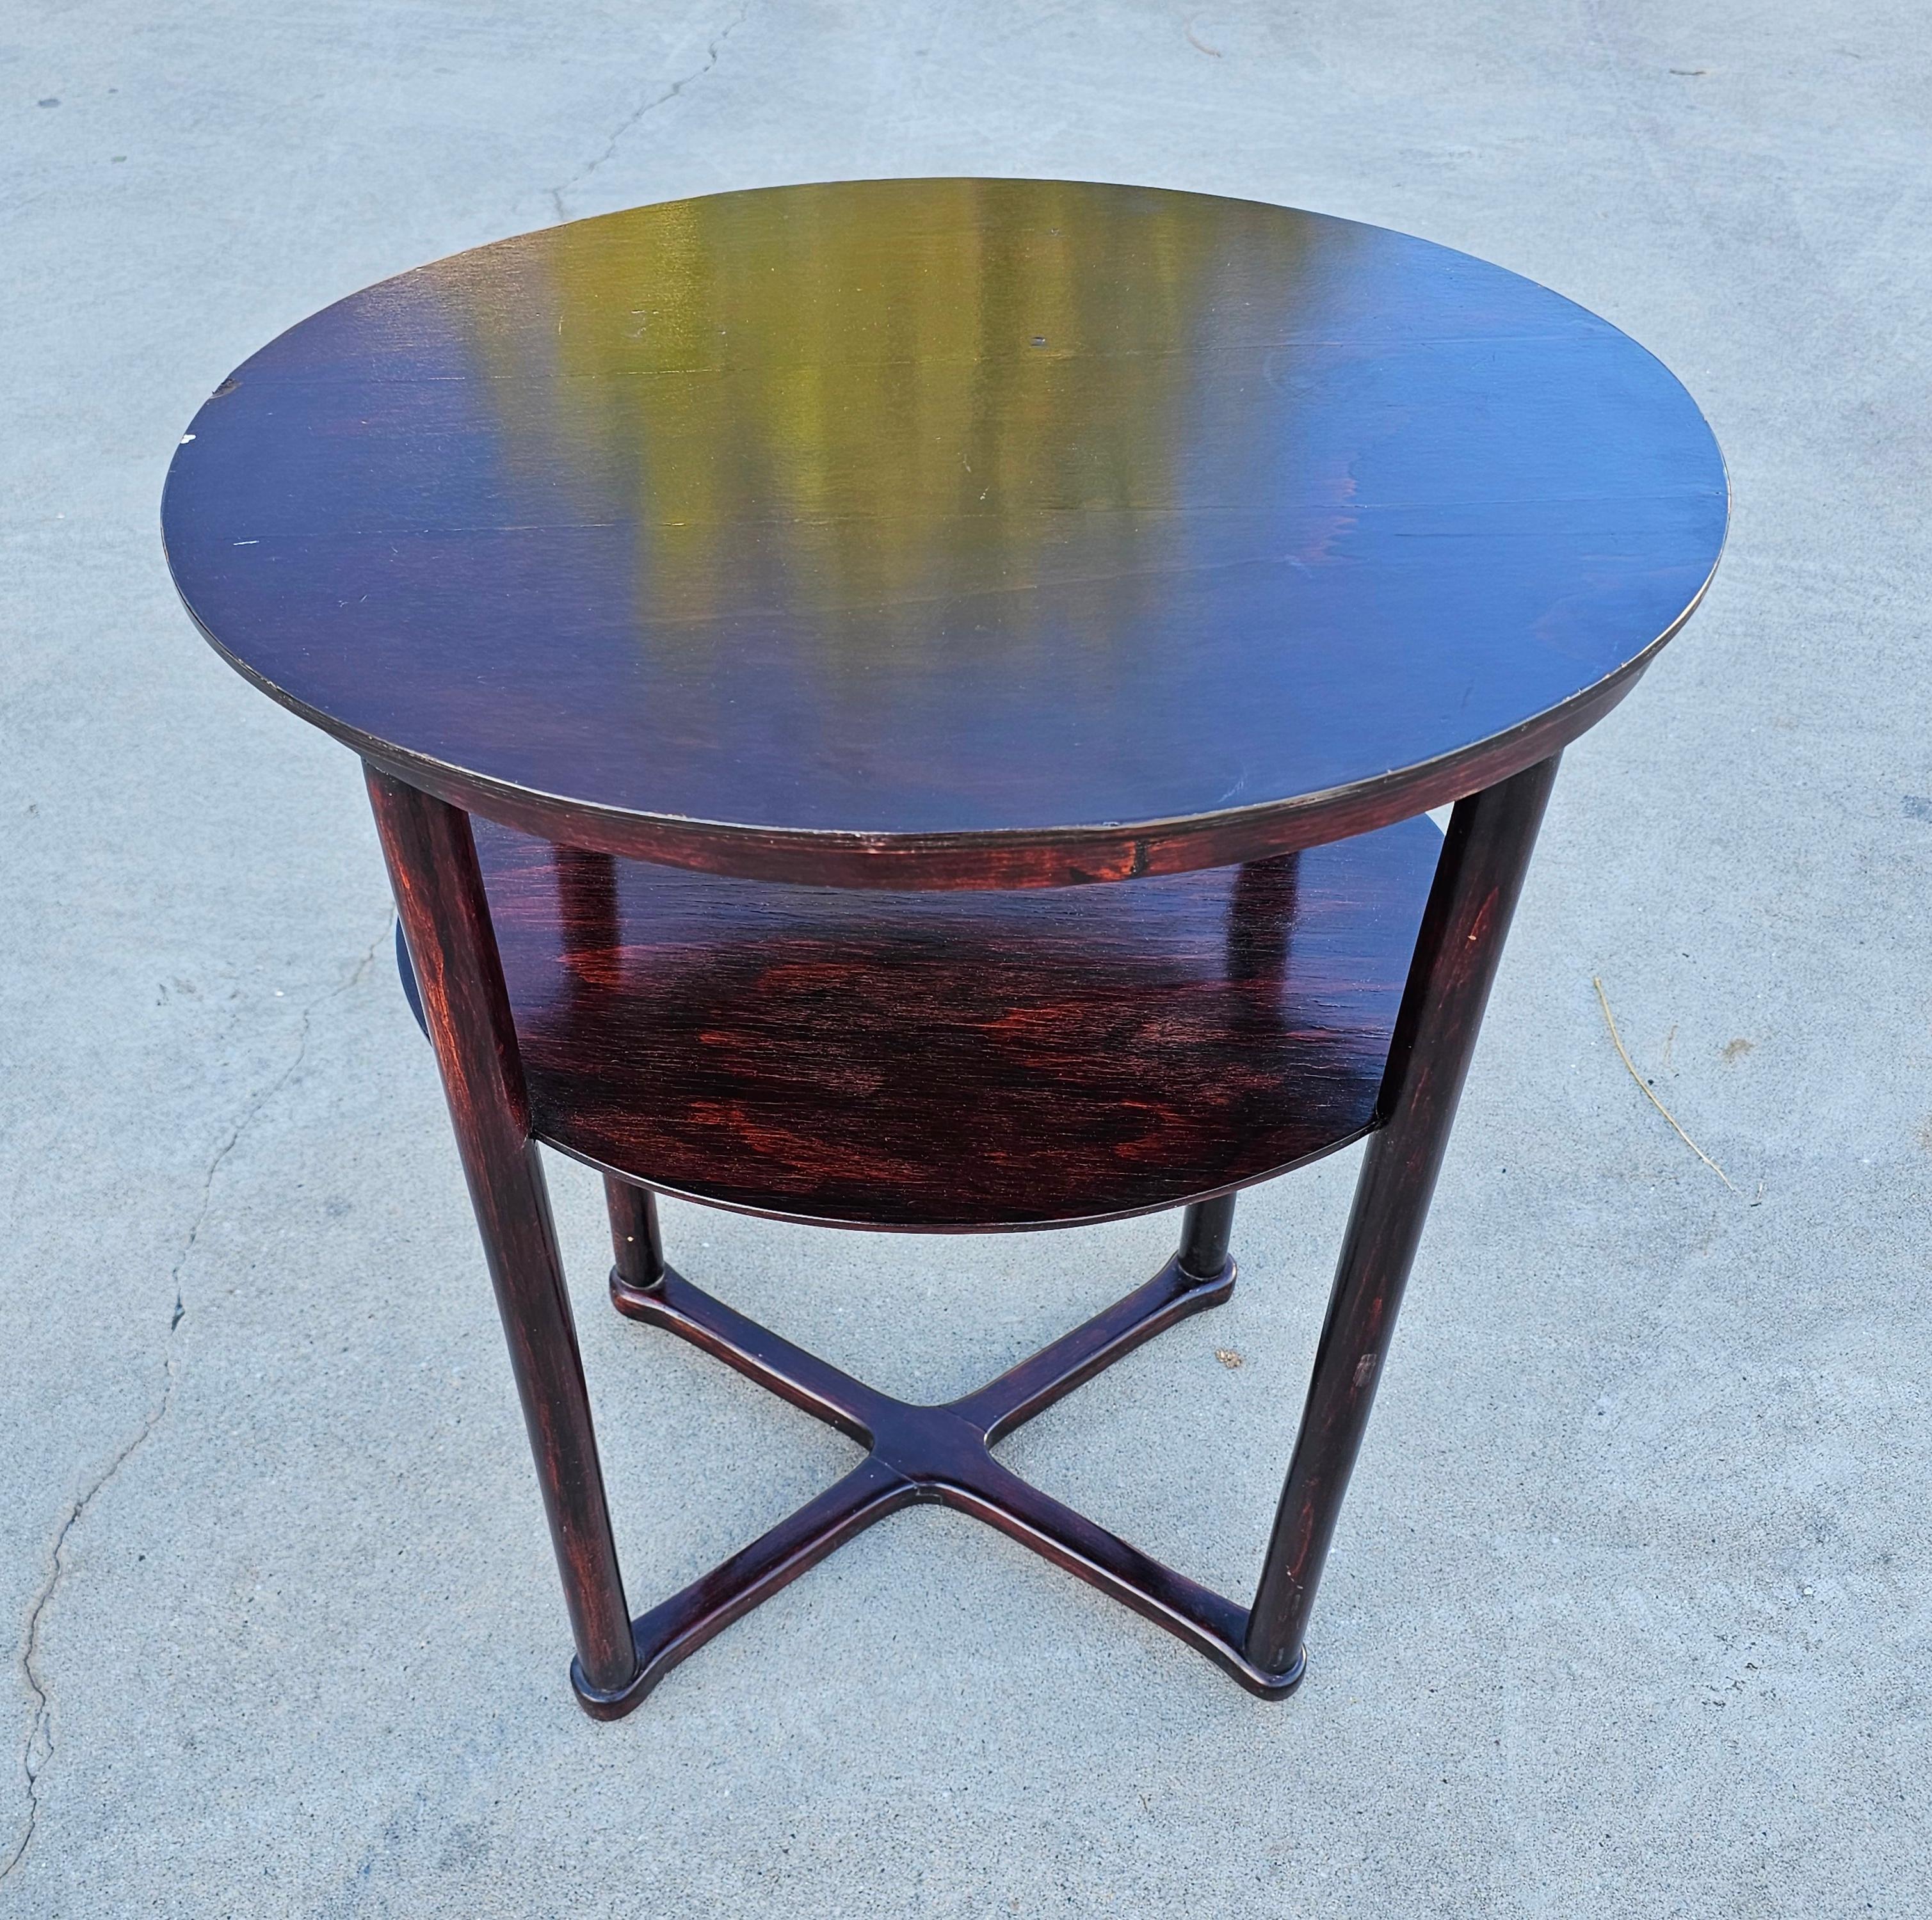 In this listing you will find a very rare Viennese Secession Oval side table Model 960/2 designed by Josef Hoffmann and manufactured by J&J Kohn. Made in Austria in 1910s. The scanned page of the Kohn's catalogue showing this model of the table is